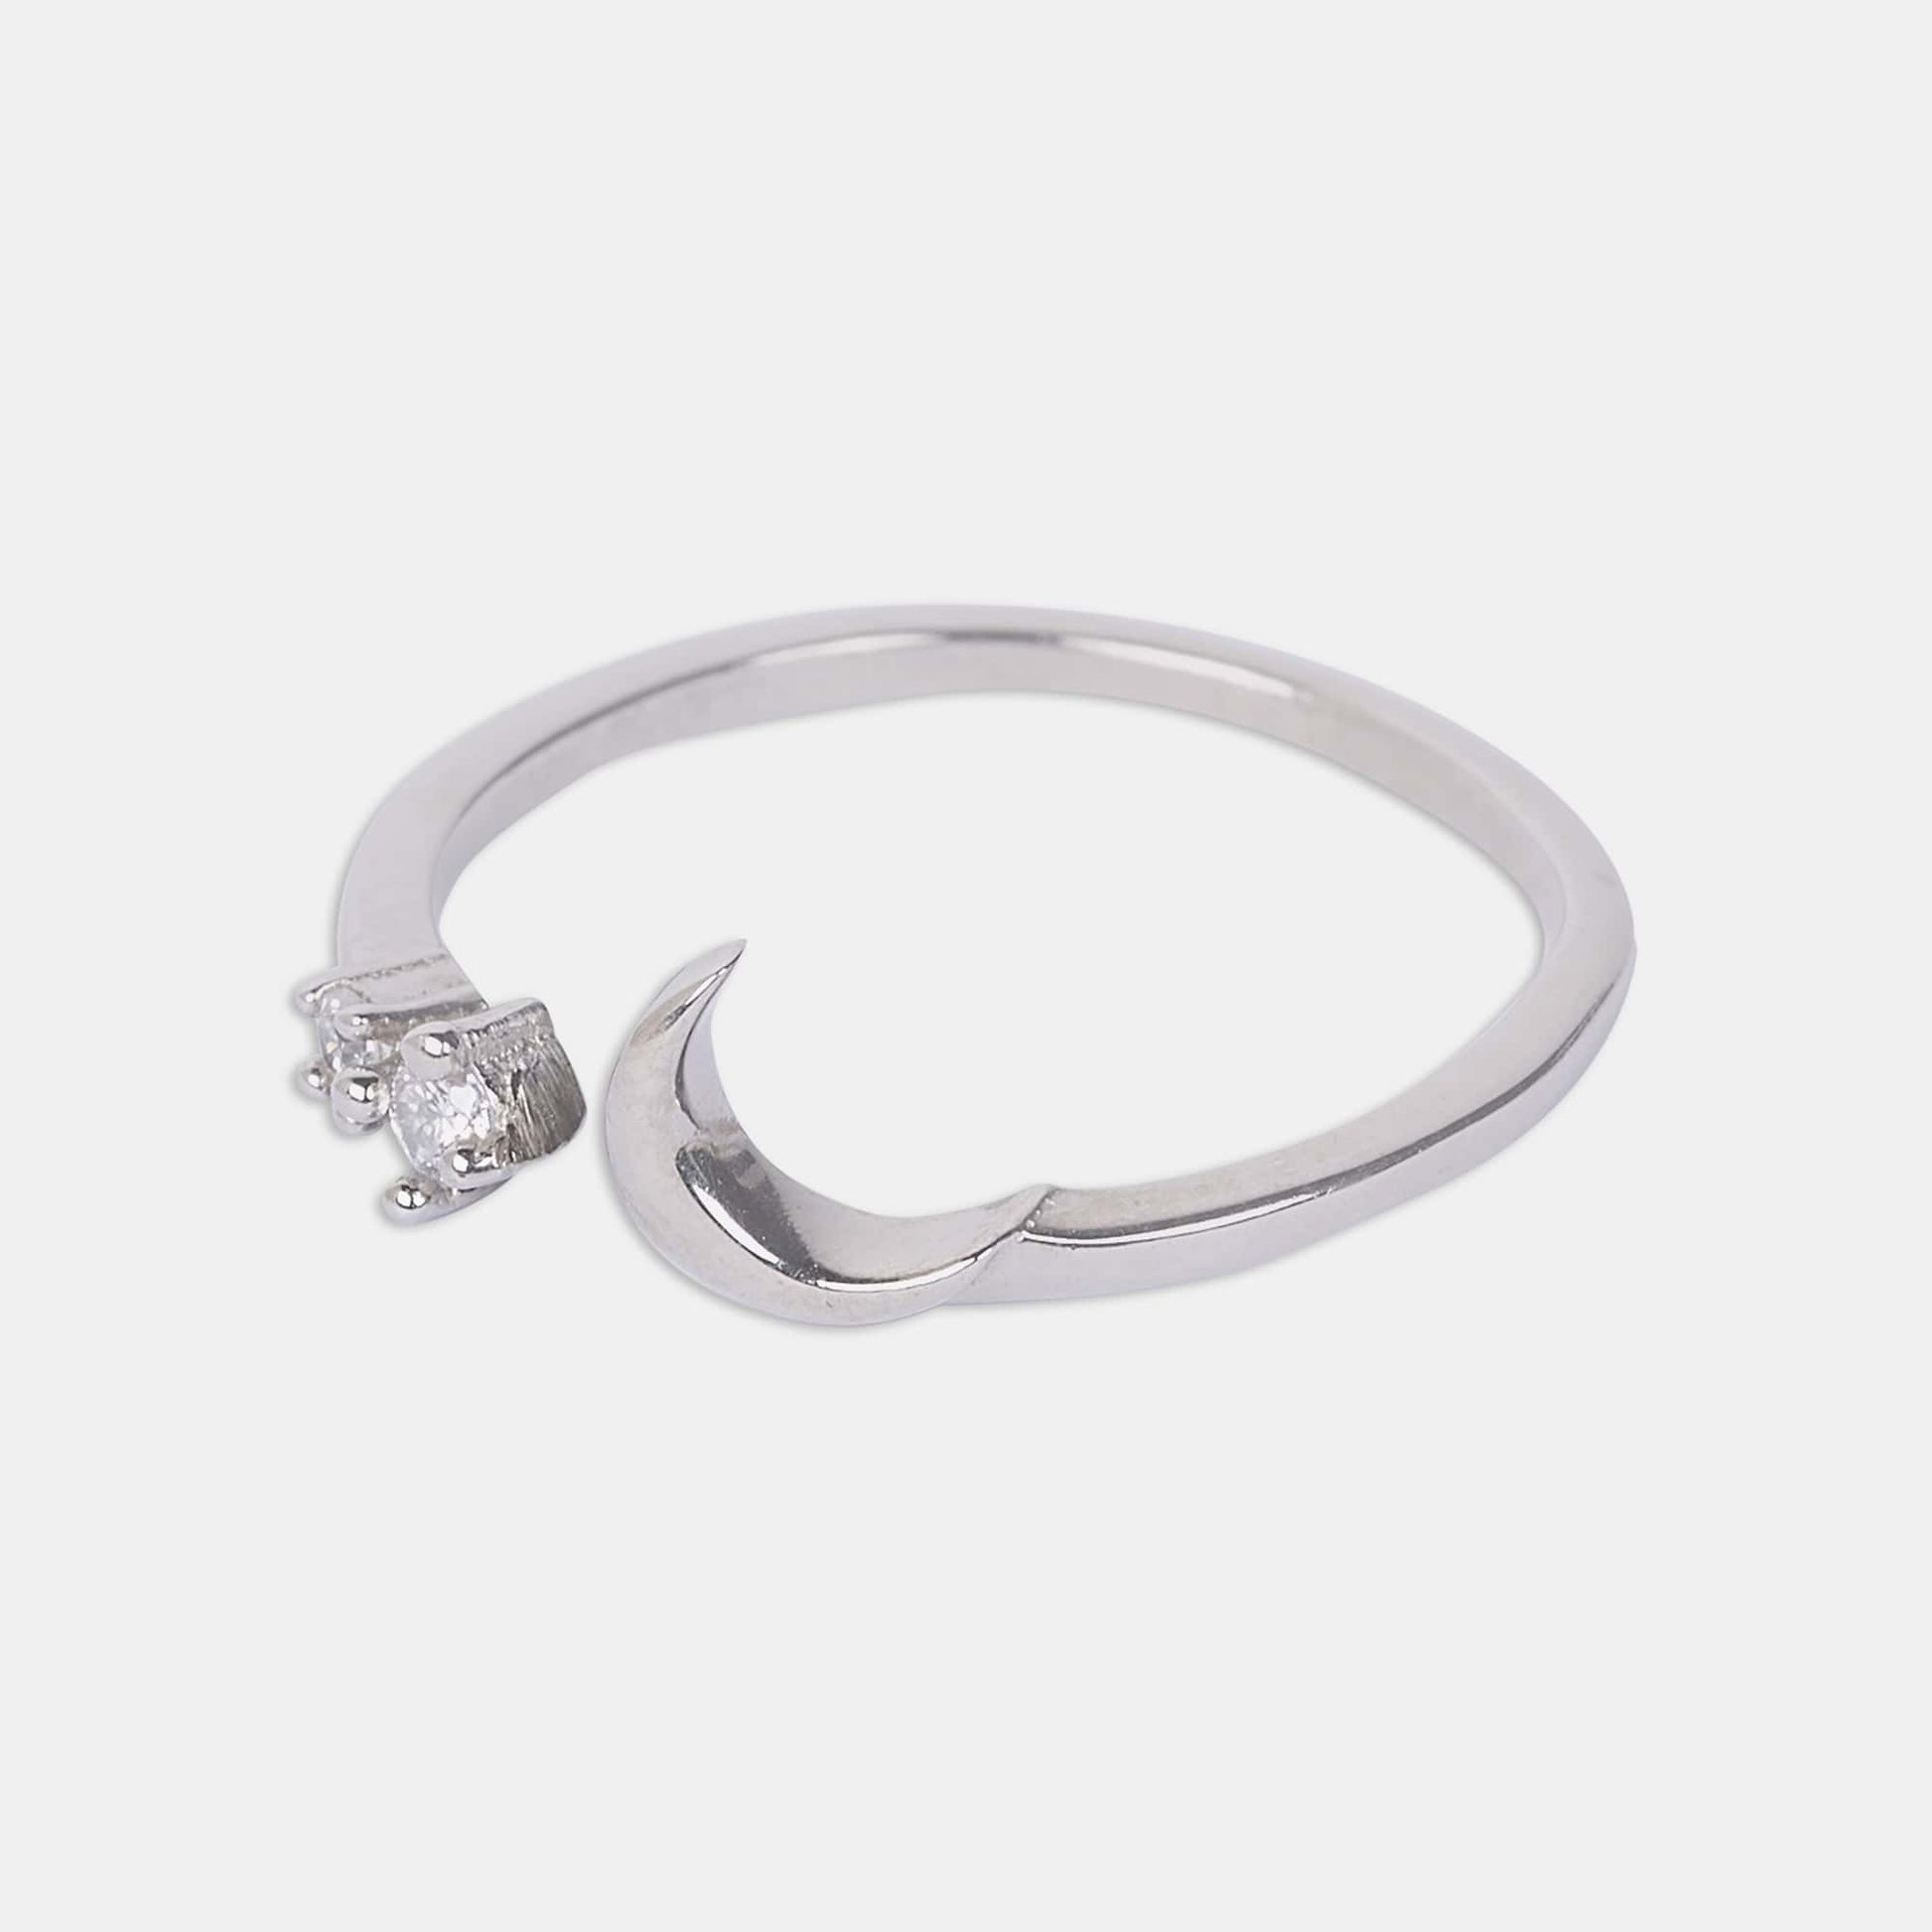 A sterling silver ring featuring a delicate crescent and star design